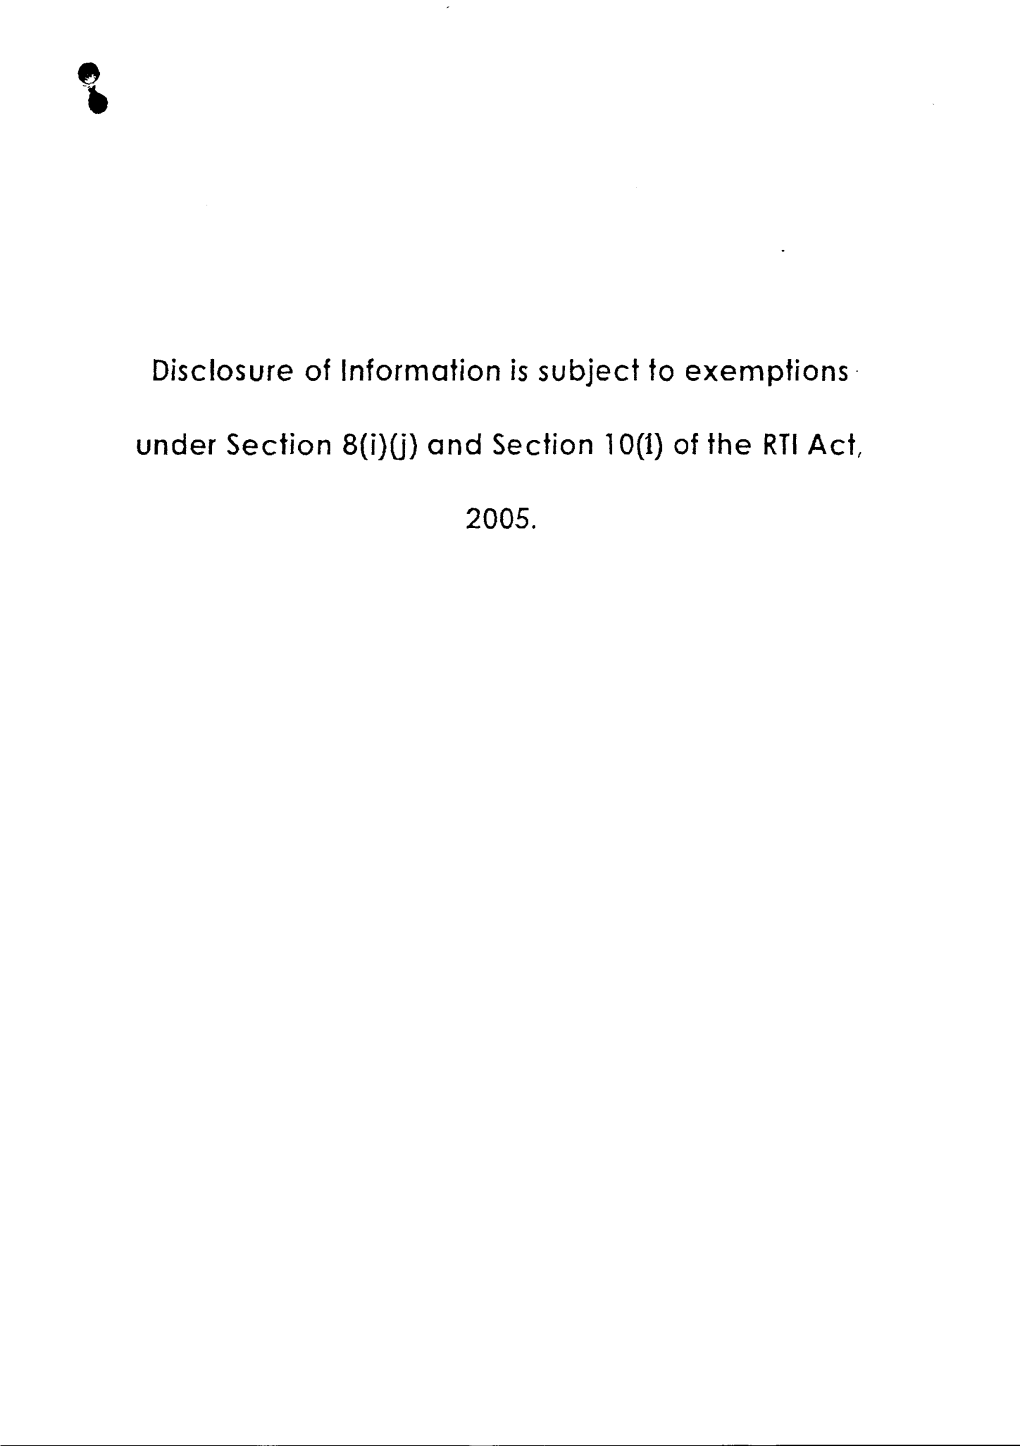 (J) and Section 10(1) of the Rh Act, 2005